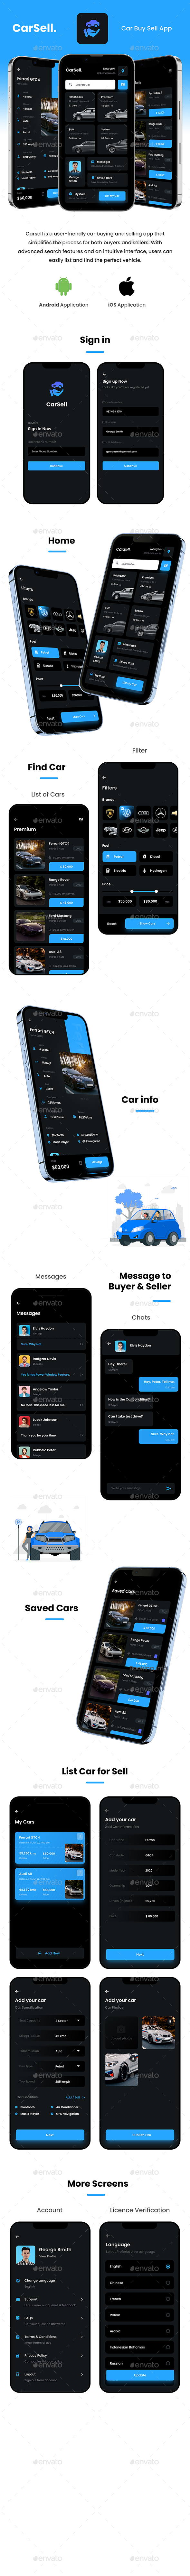 Car Buying Selling App UI Kit | CarSell